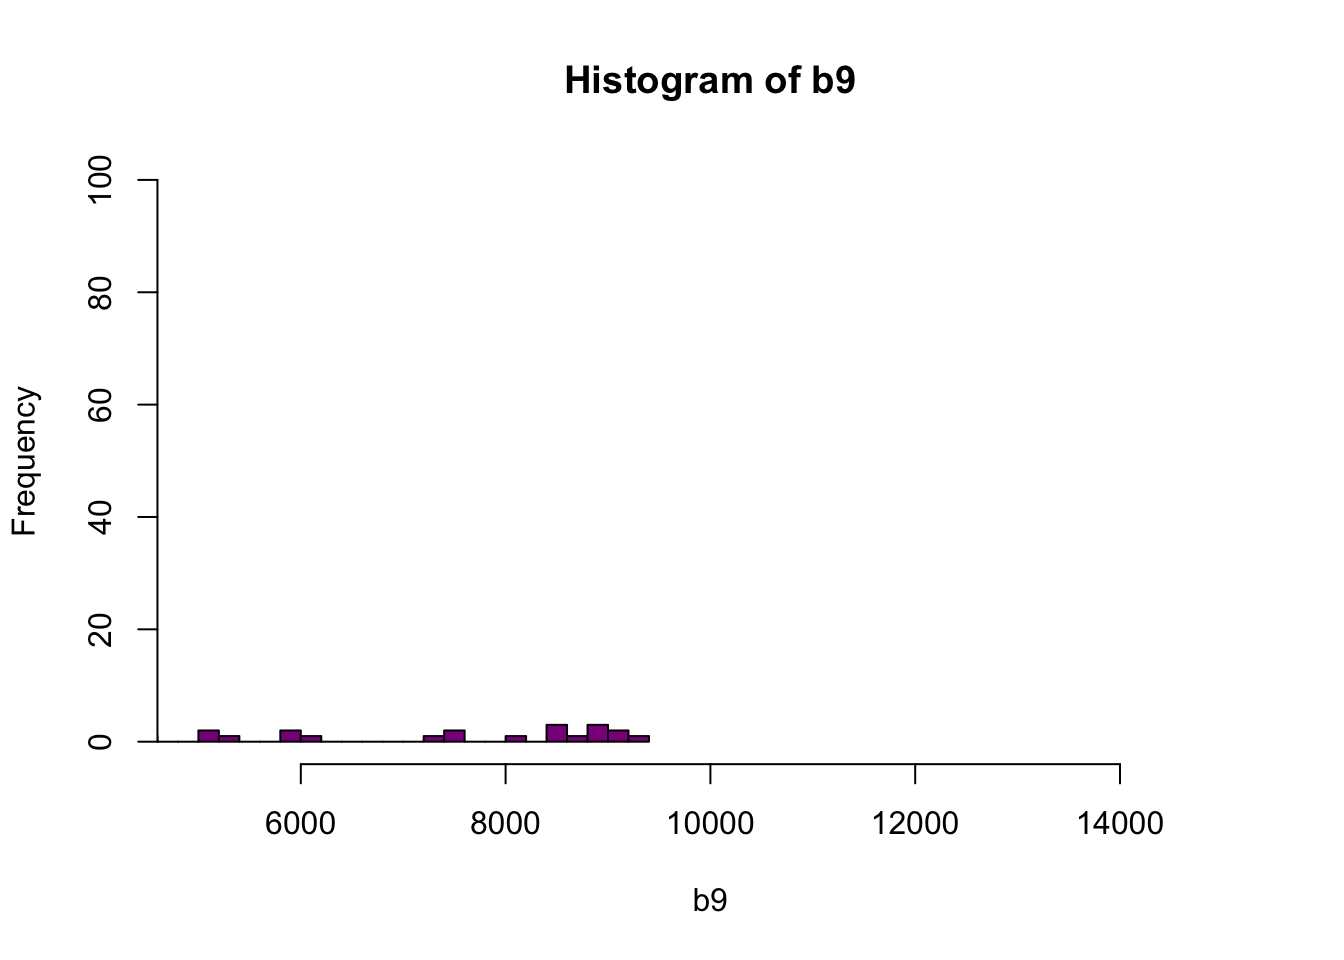 Histogram of reflectance values between 5000 and 15000 for band 9. Reflectance values are on the x-axis, and the frequency is on the y-axis. Plot shows that a very few number of pixels have reflectance values larger than 5,000. These values are skewing how the image is being rendered and heavily impacting the way the image is drawn on our monitor.